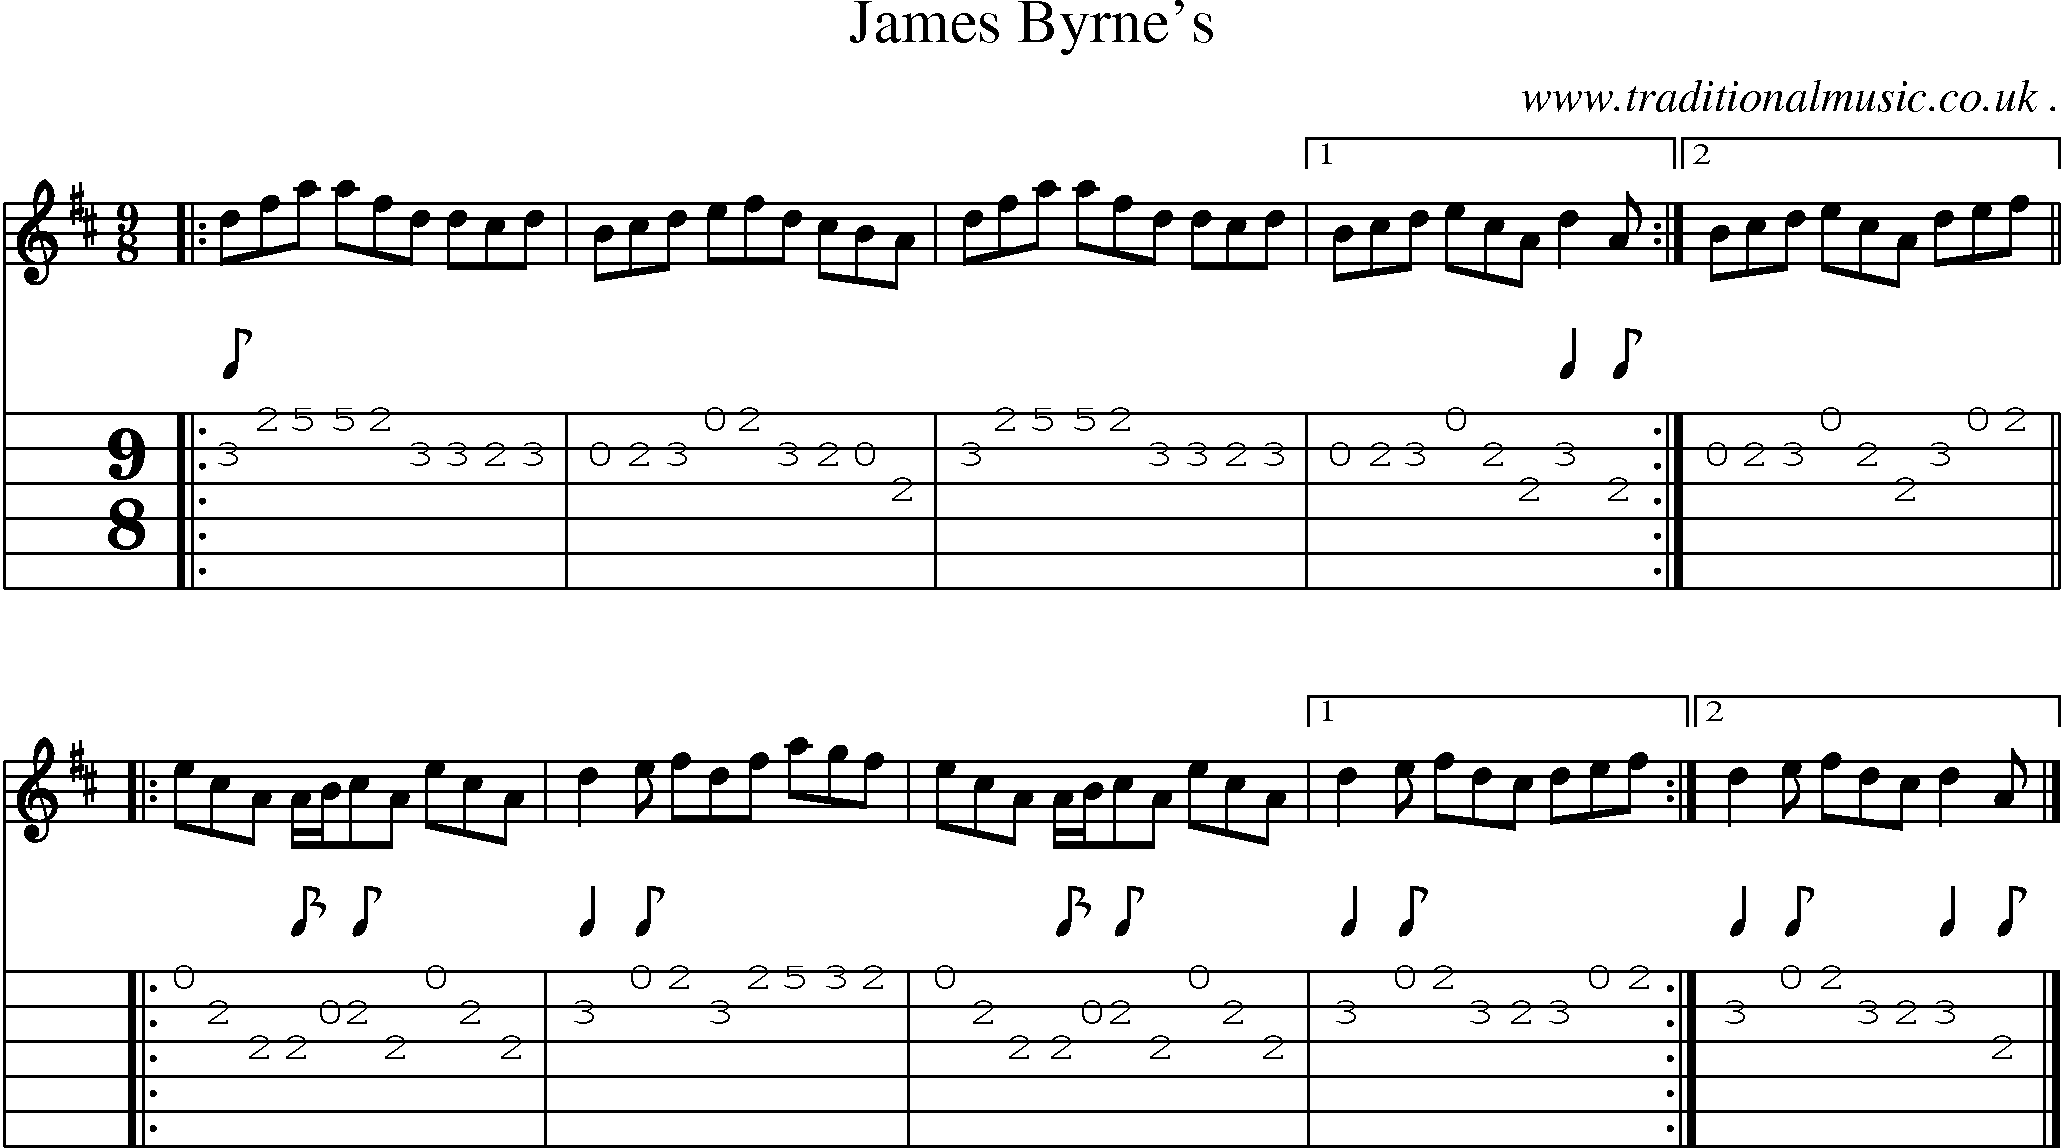 Sheet-music  score, Chords and Guitar Tabs for James Byrnes